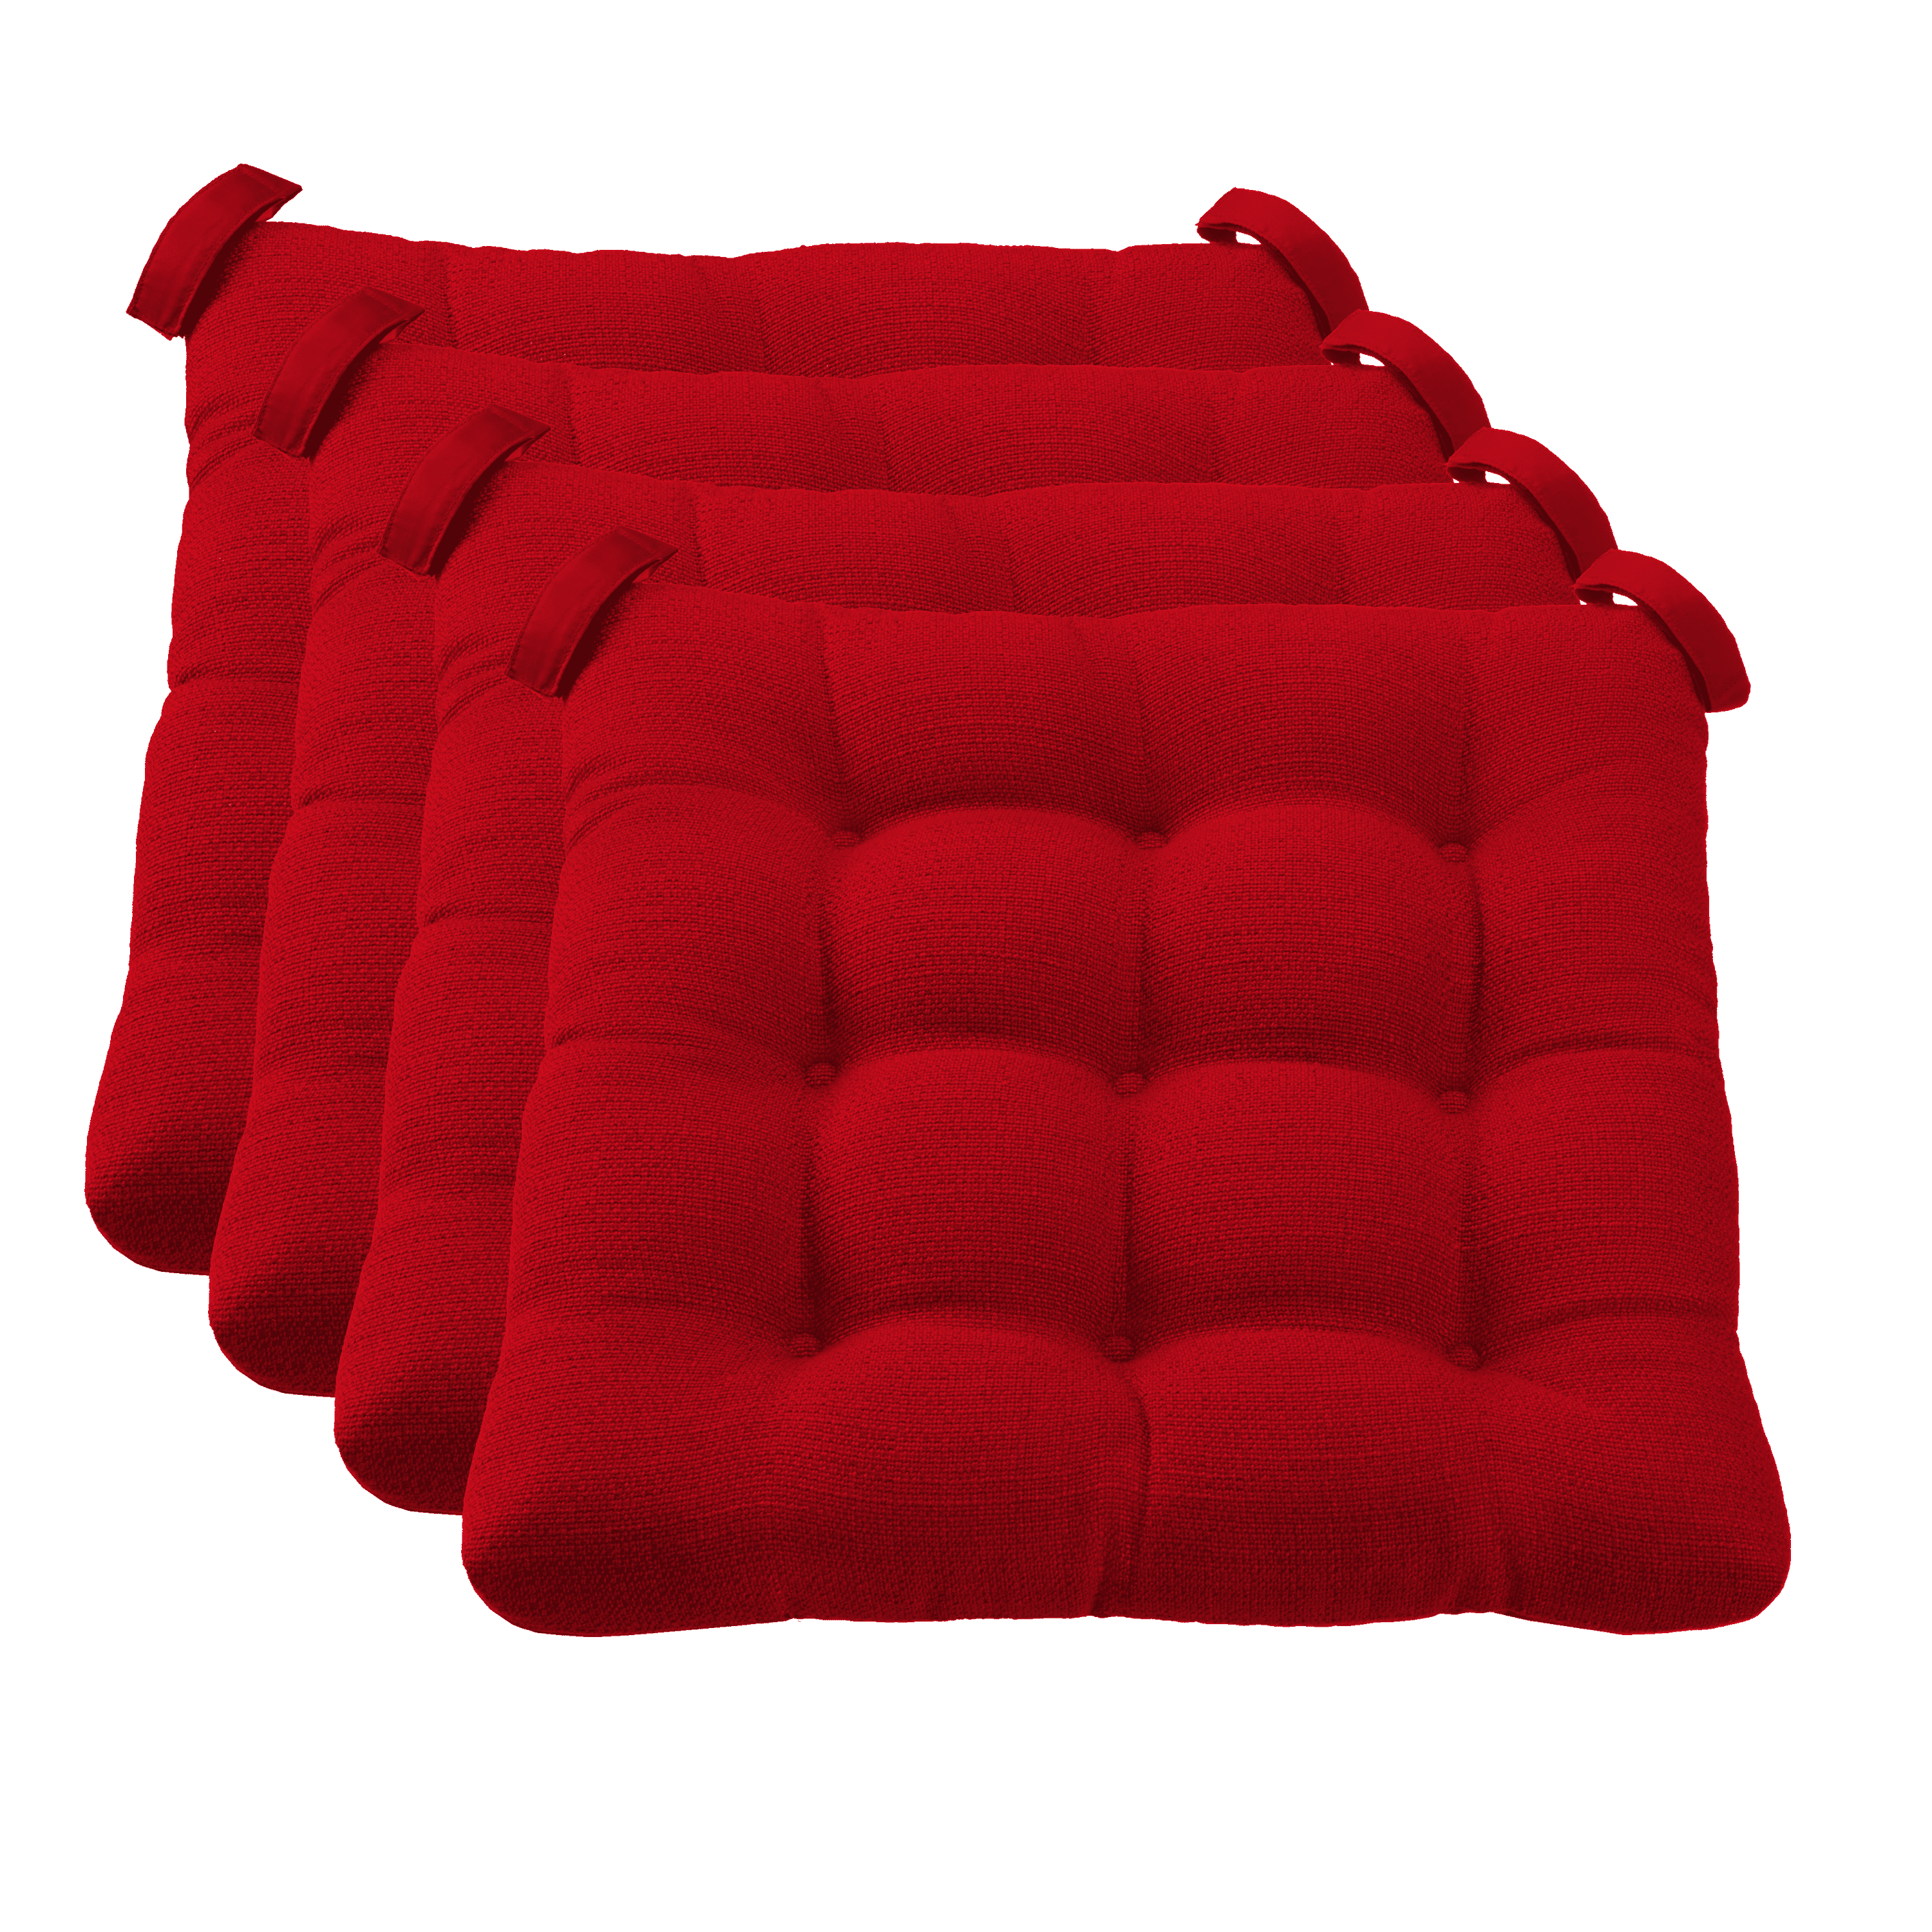 Mainstays Textured Chair Seat Pad (Chair Cushion), Red Color, 4-Piece